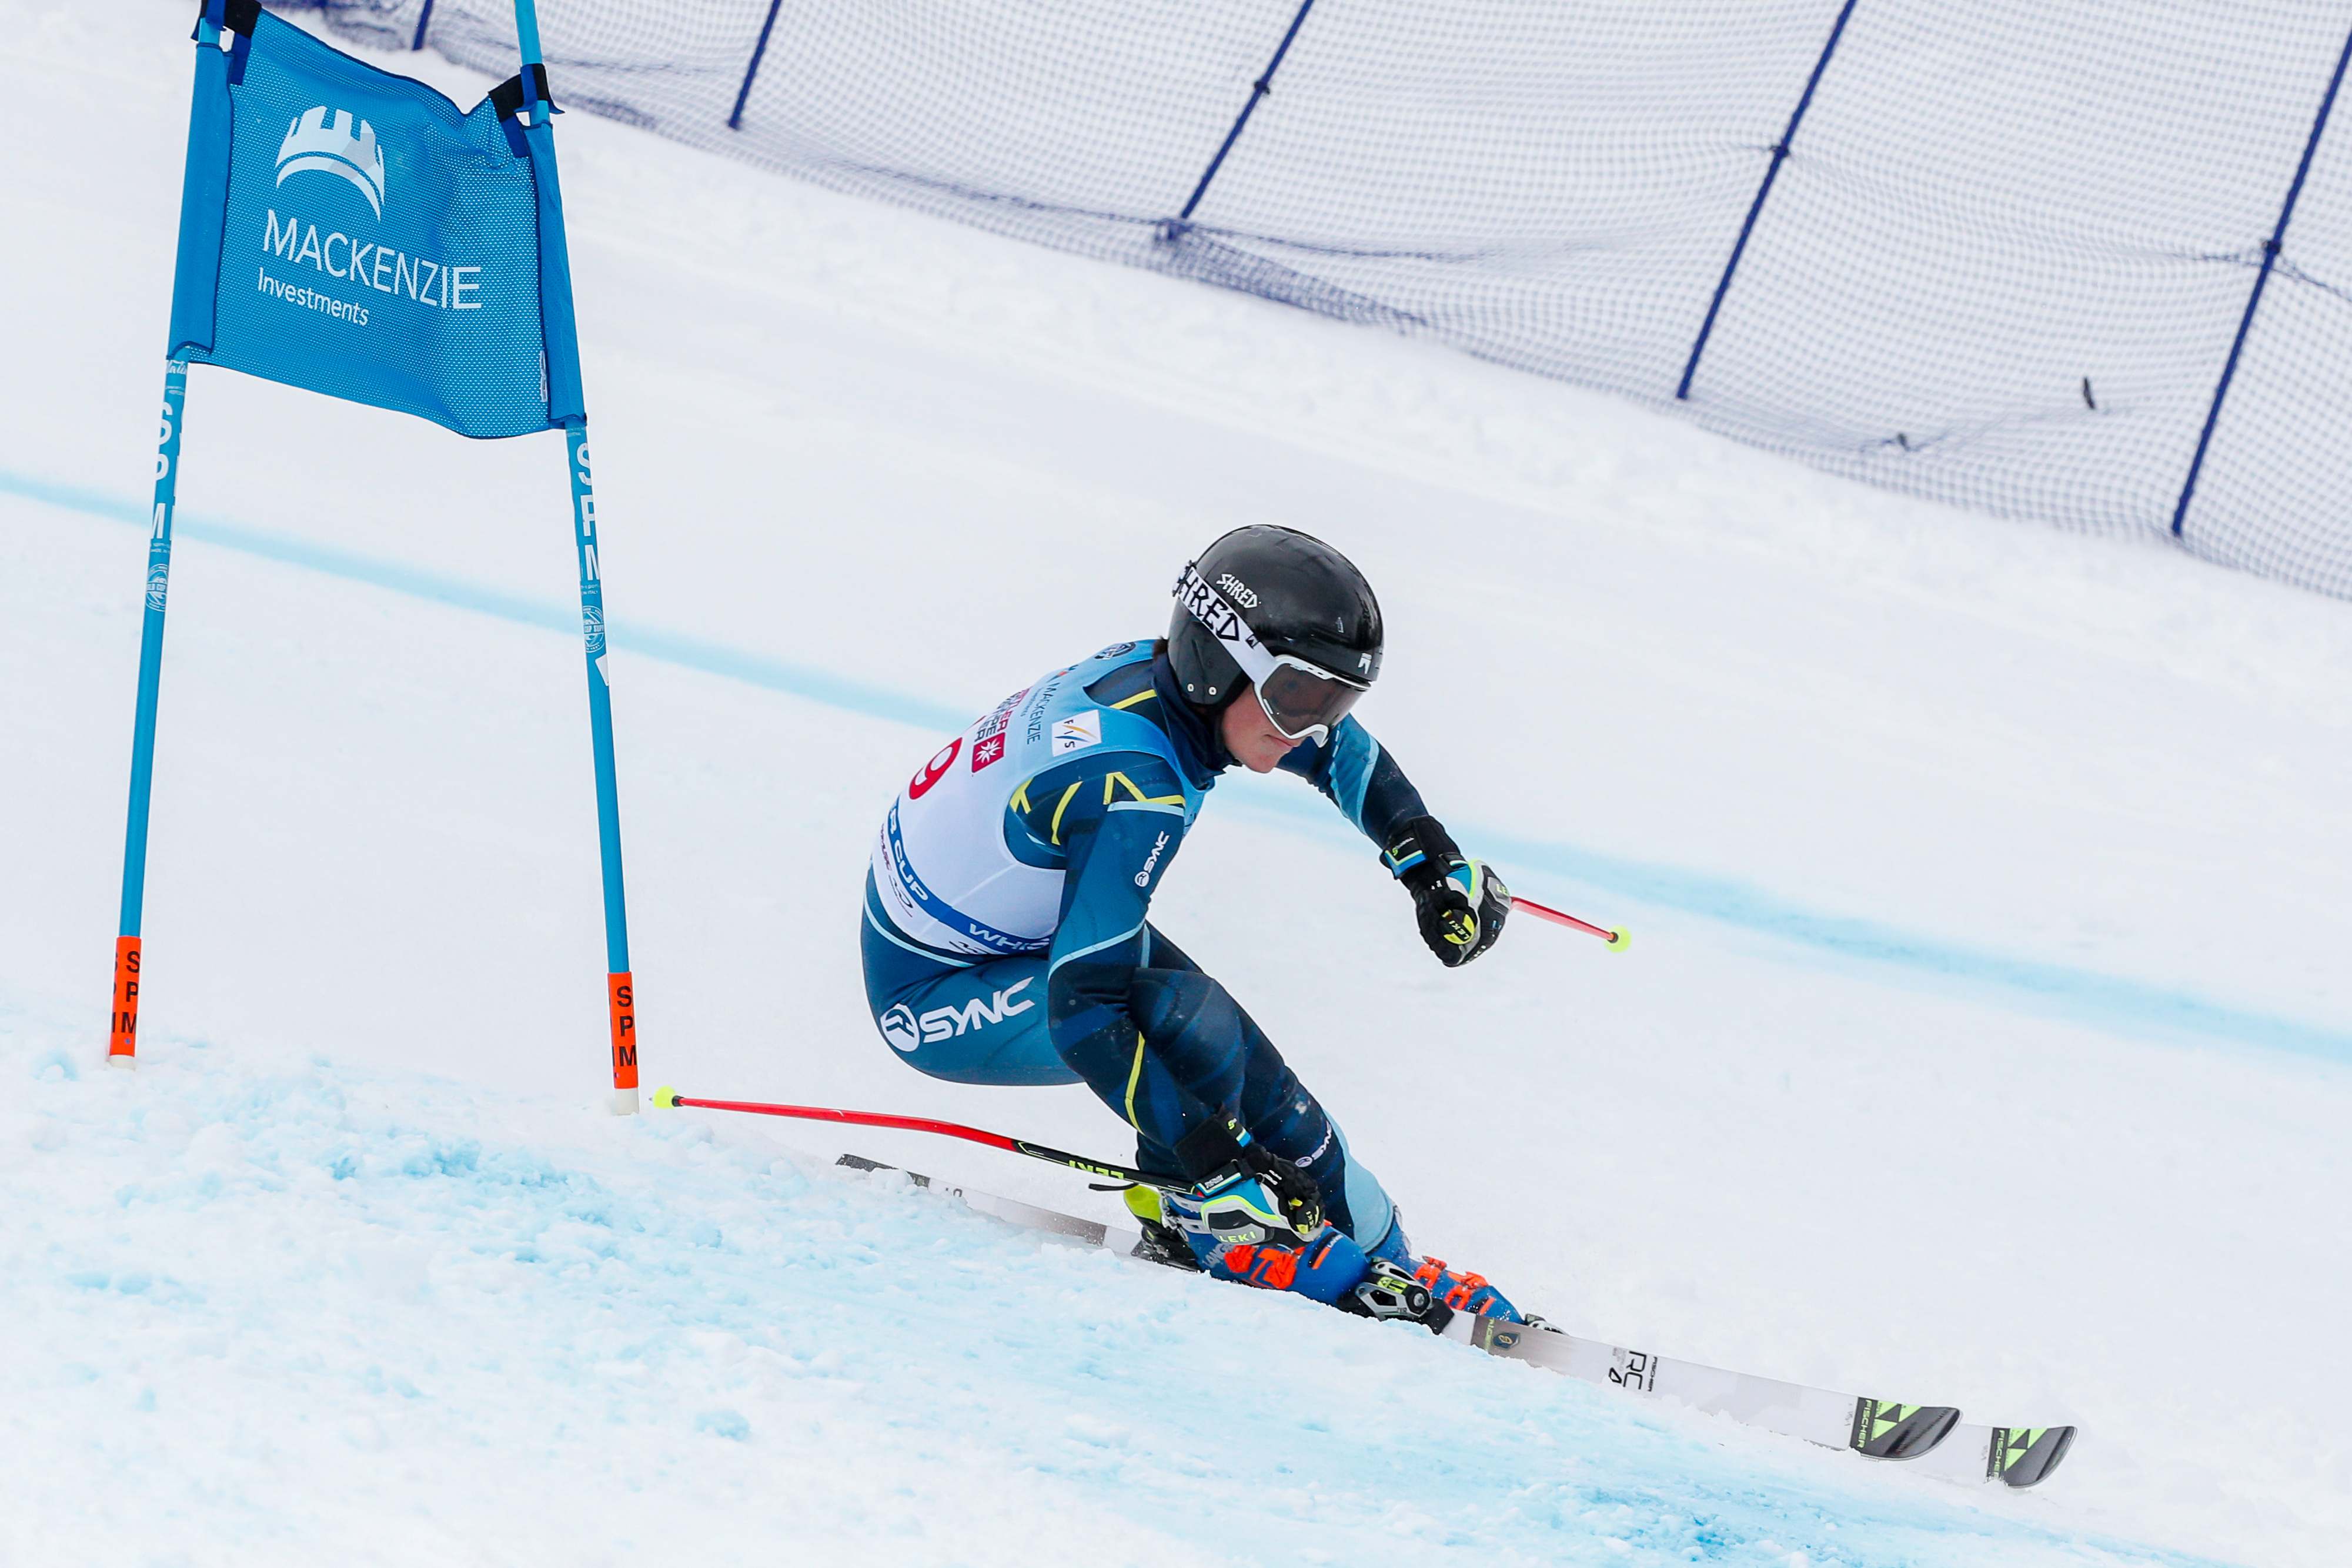 Ryder Sarchett competes in the super-G. 